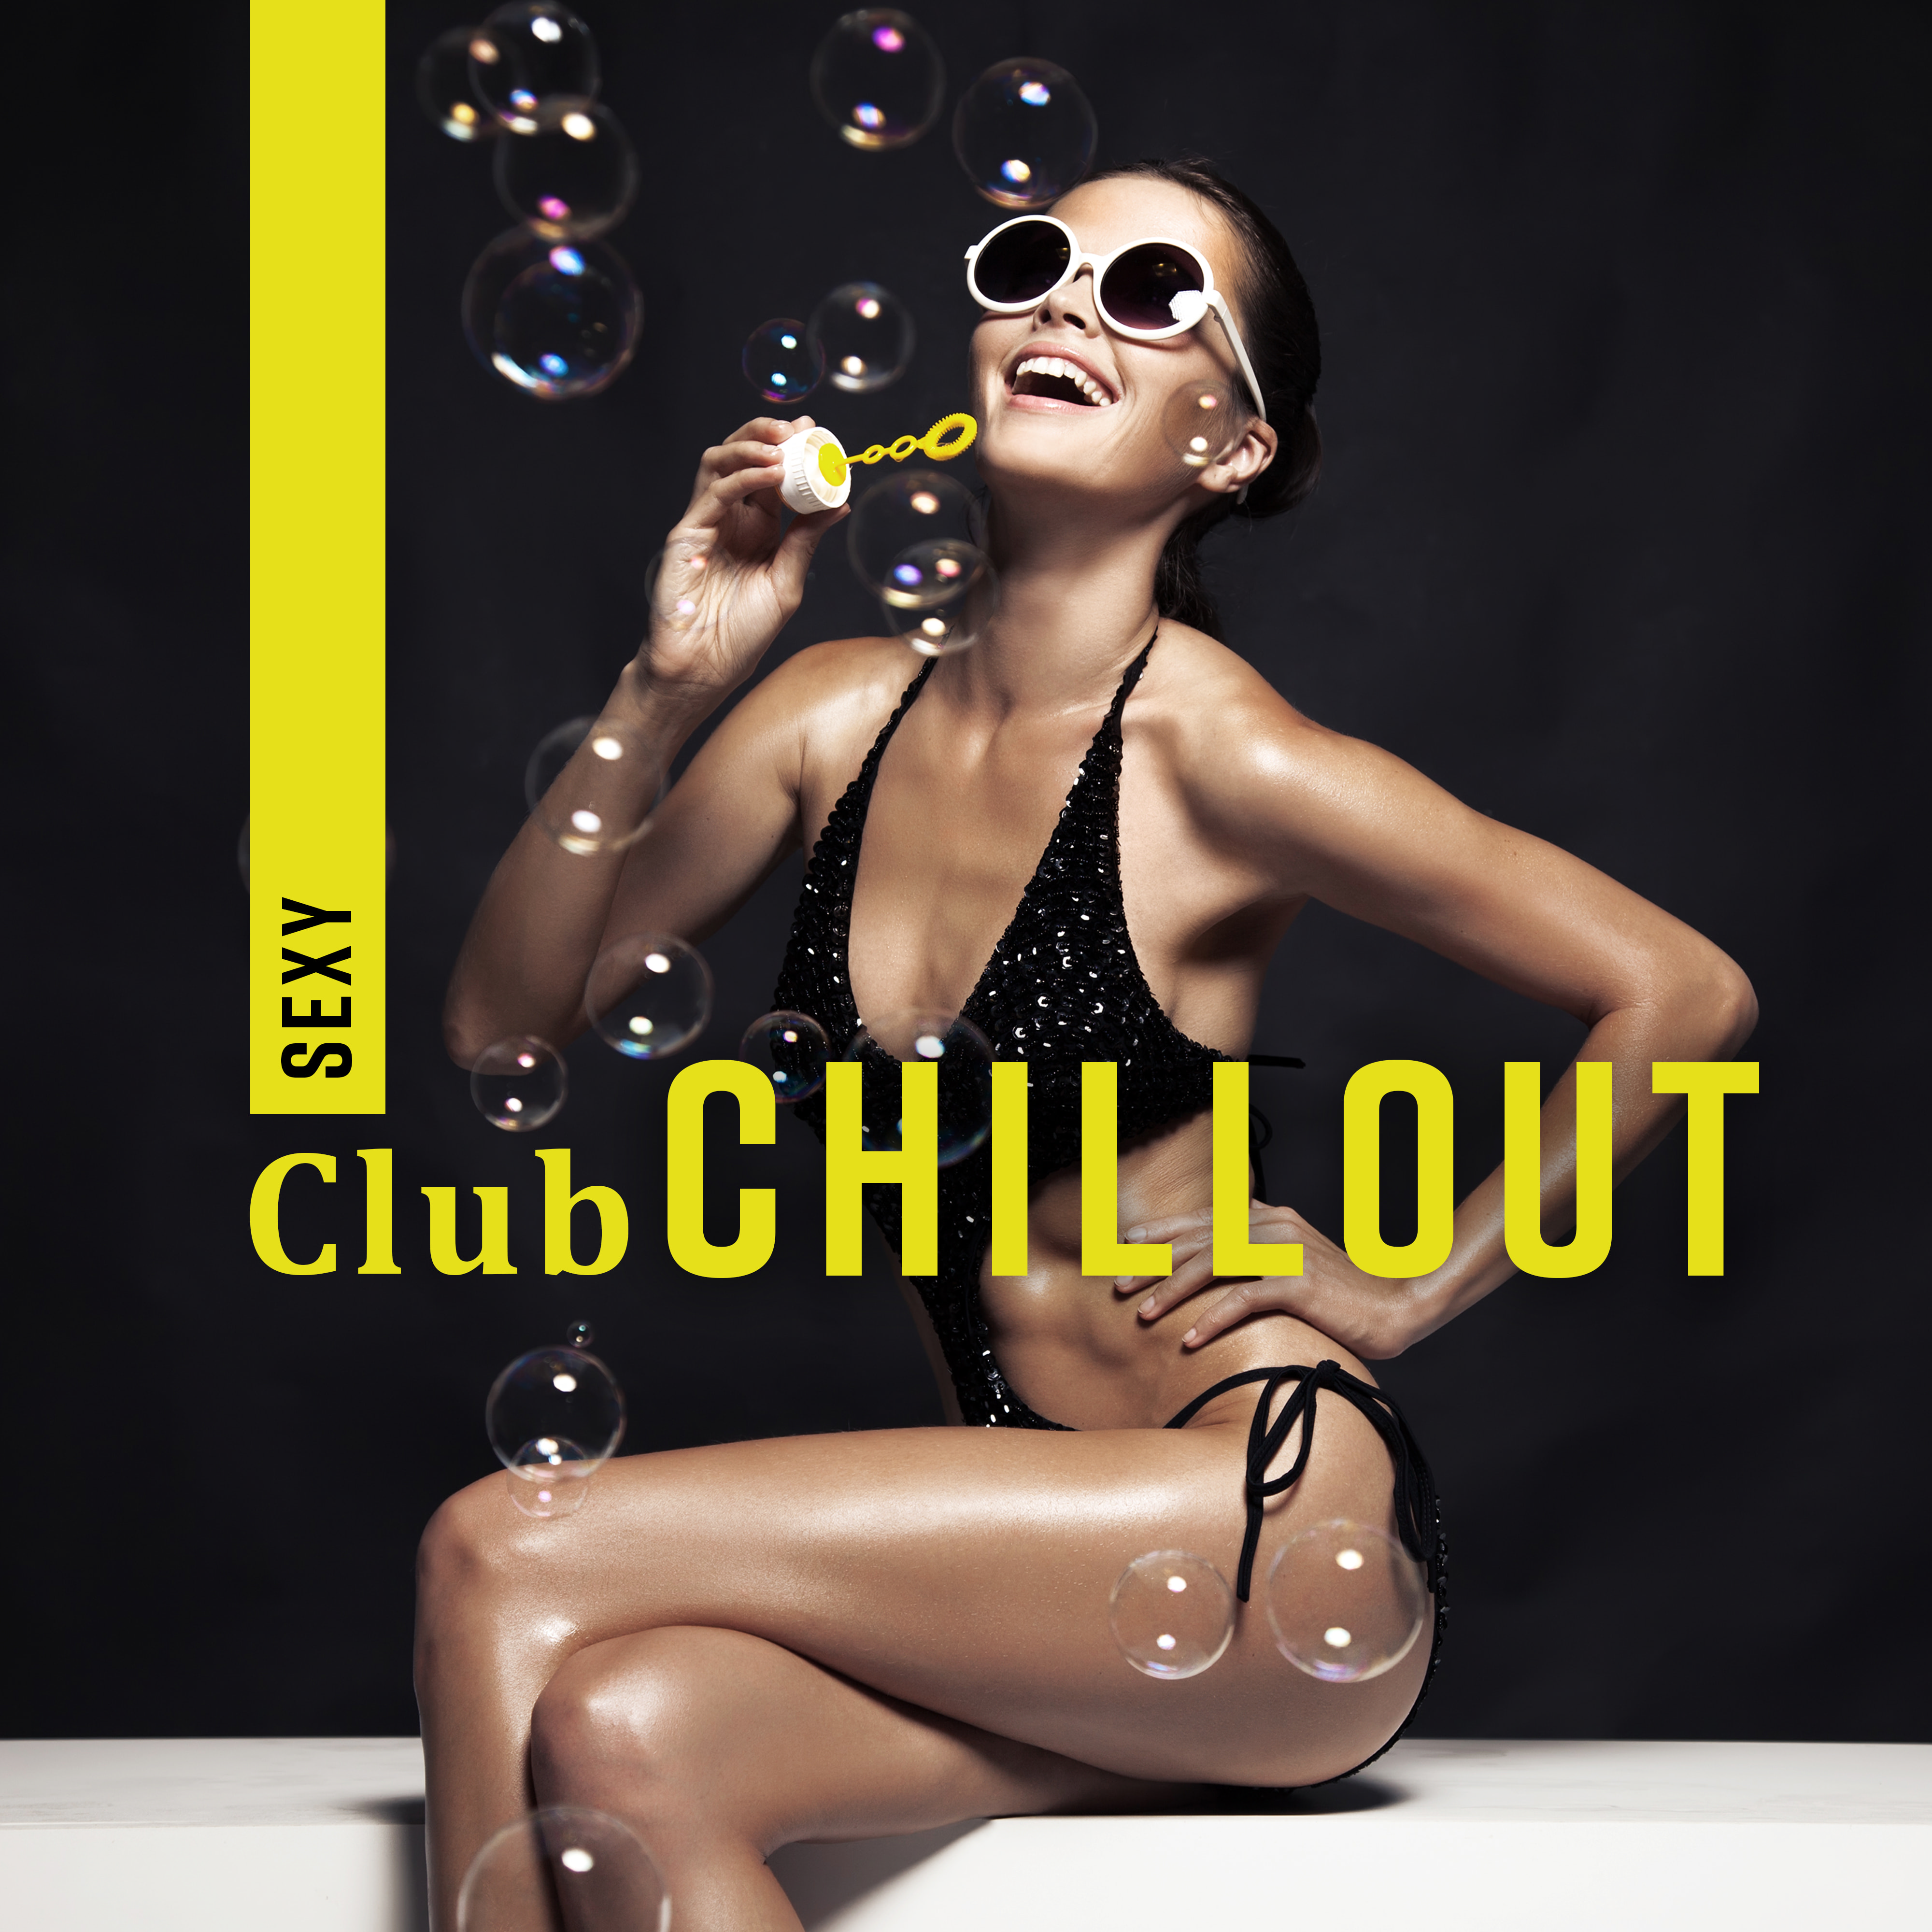 **** Club Chillout